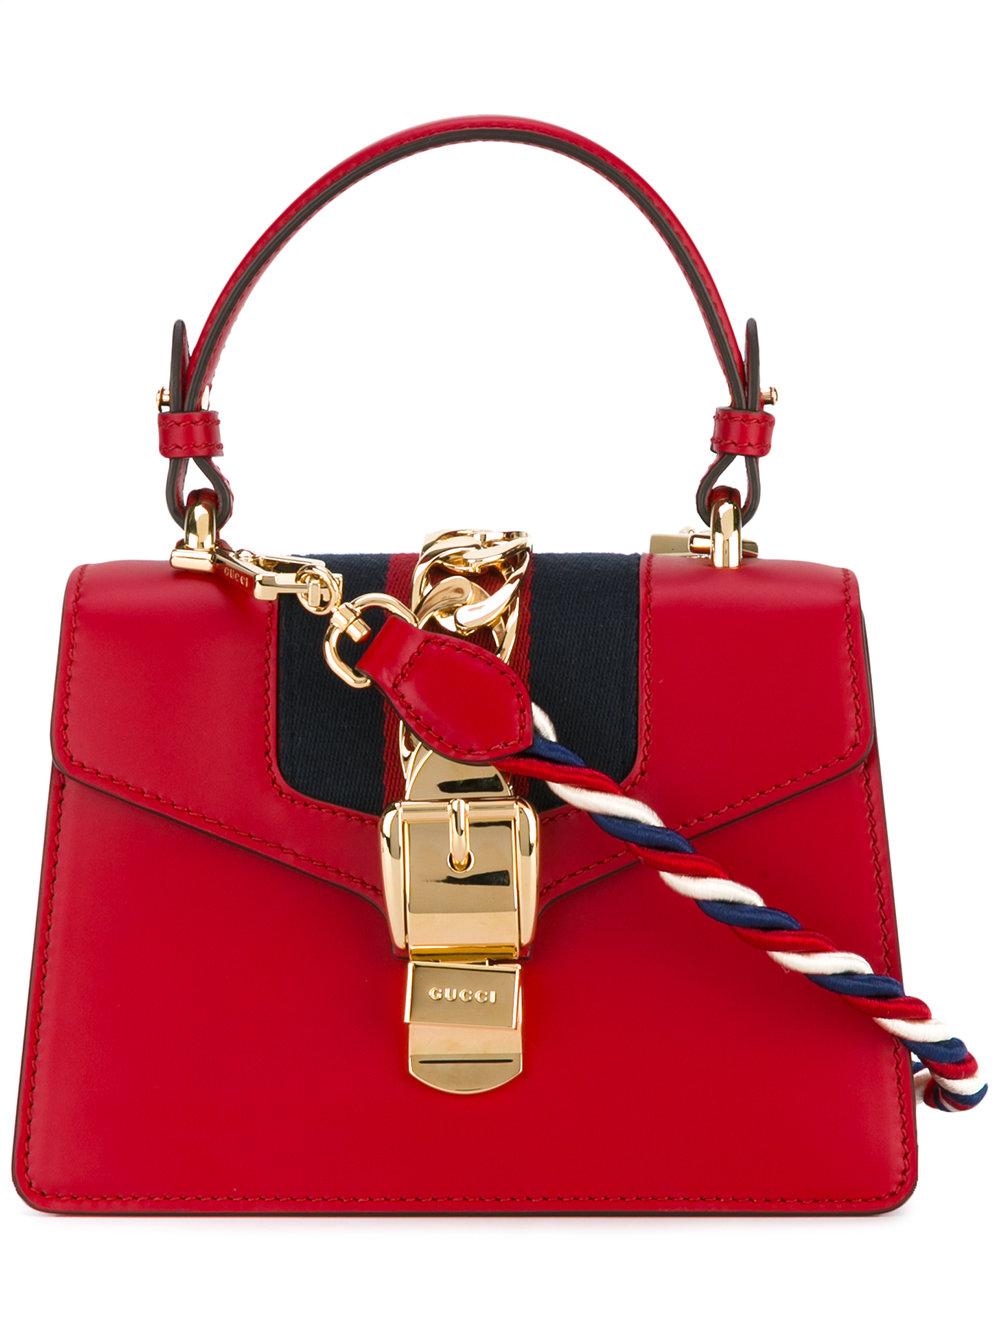 Lyst - Gucci Sylvie Leather Mini Bag in Red